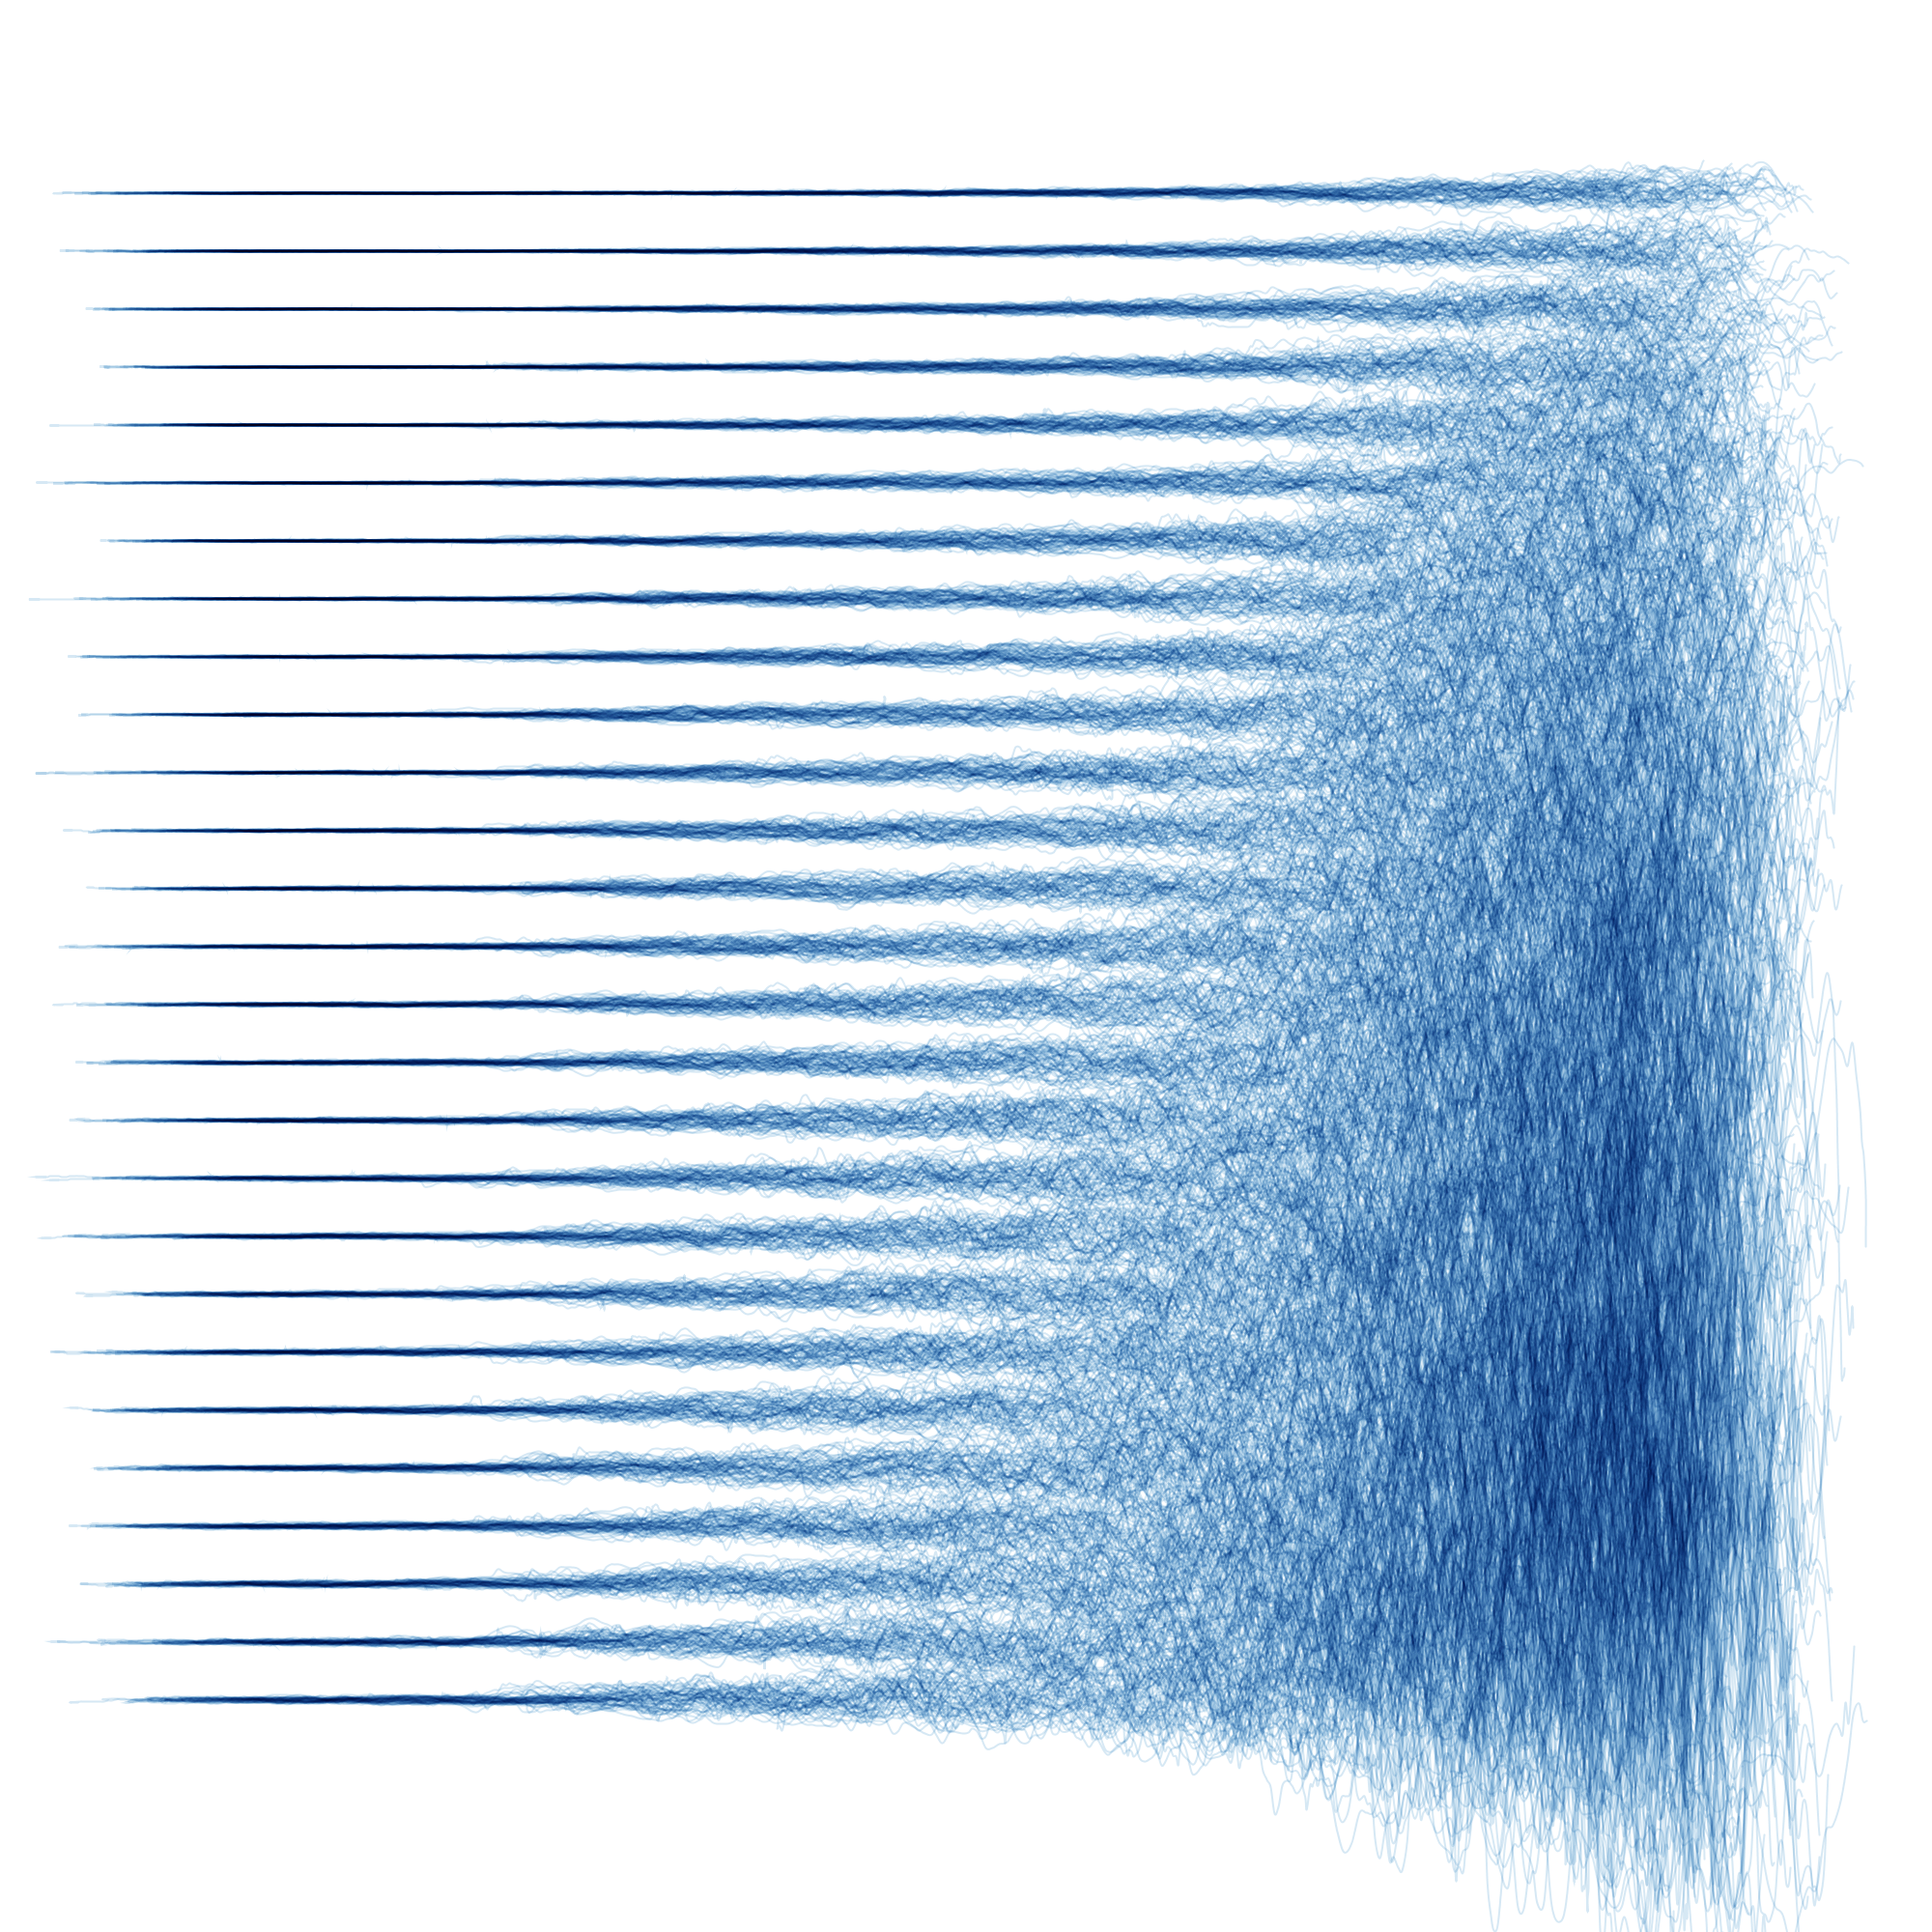 A generative art piece that looks a little like seismometer readings